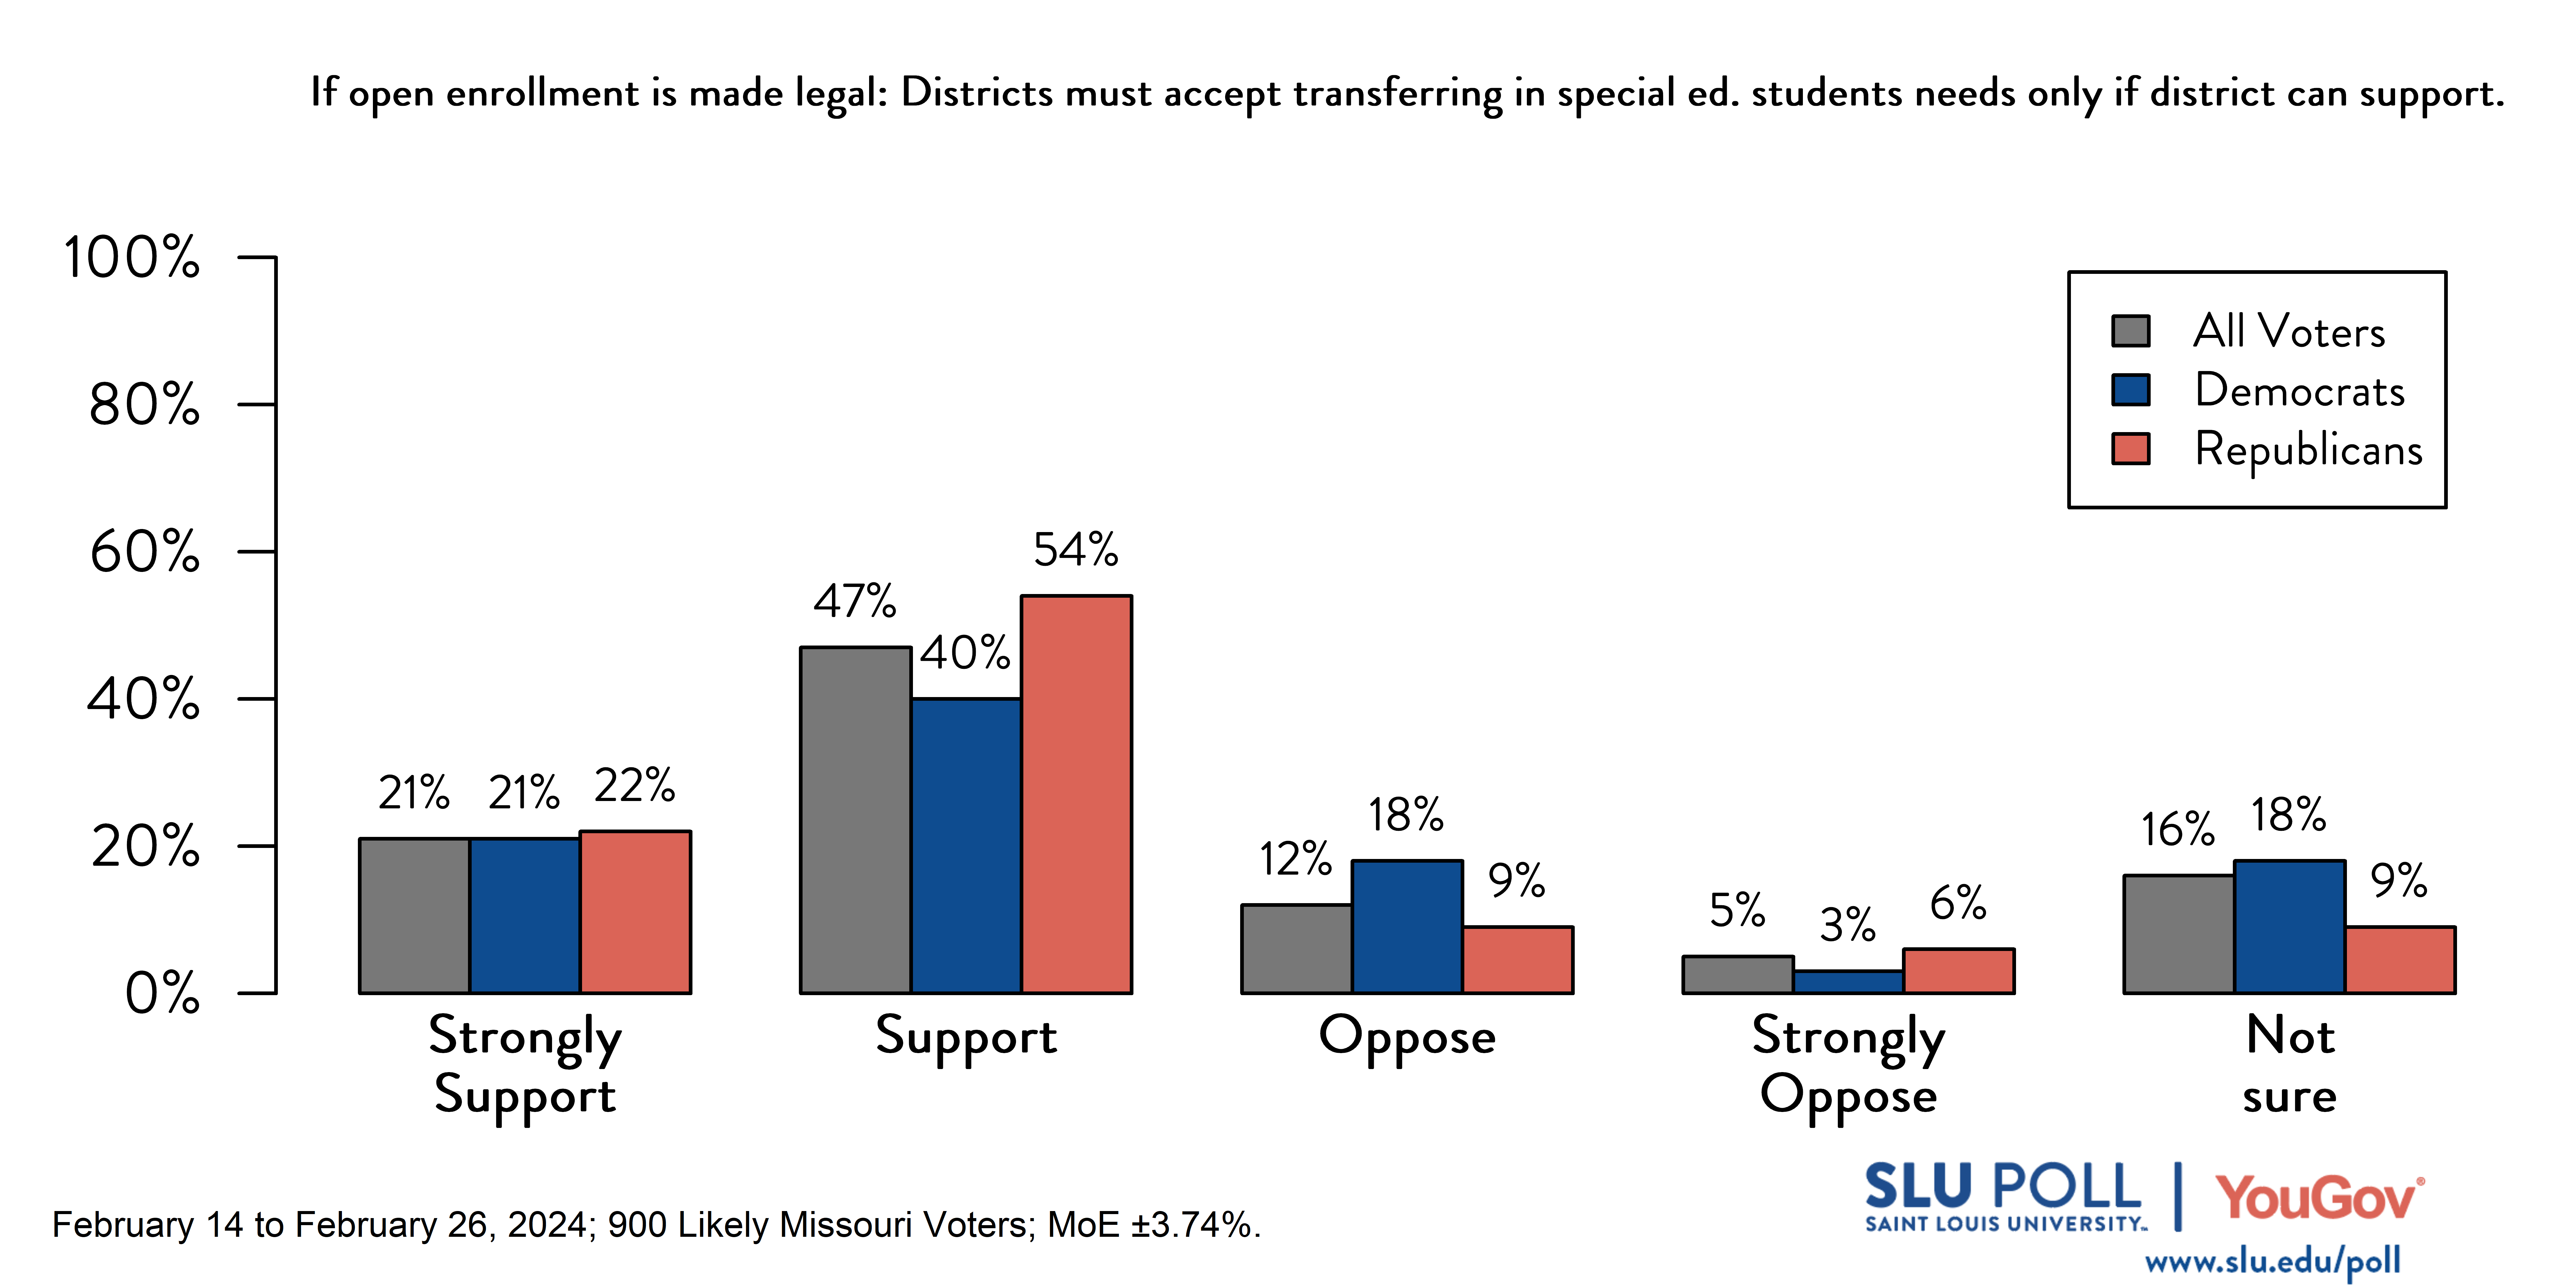 Likely voters' responses to 'If Missouri allows students to enroll in public schools outside their resident school districts (that is, the district where they live), indicate whether you support or oppose the following…School districts must accept transferring in students who have special education needs only if the receiving school district determines it can provide appropriate special educational services?': 21% Strongly support, 47% Support, 12% Oppose, 5% Strongly oppose, and 16% Not sure. Democratic voters' responses: ' 21% Strongly support, 40% Support, 18% Oppose, 3% Strongly oppose, and 18% Not sure. Republican voters' responses:  22% Strongly support, 54% Support, 9% Oppose, 6% Strongly oppose, and 9% Not sure.